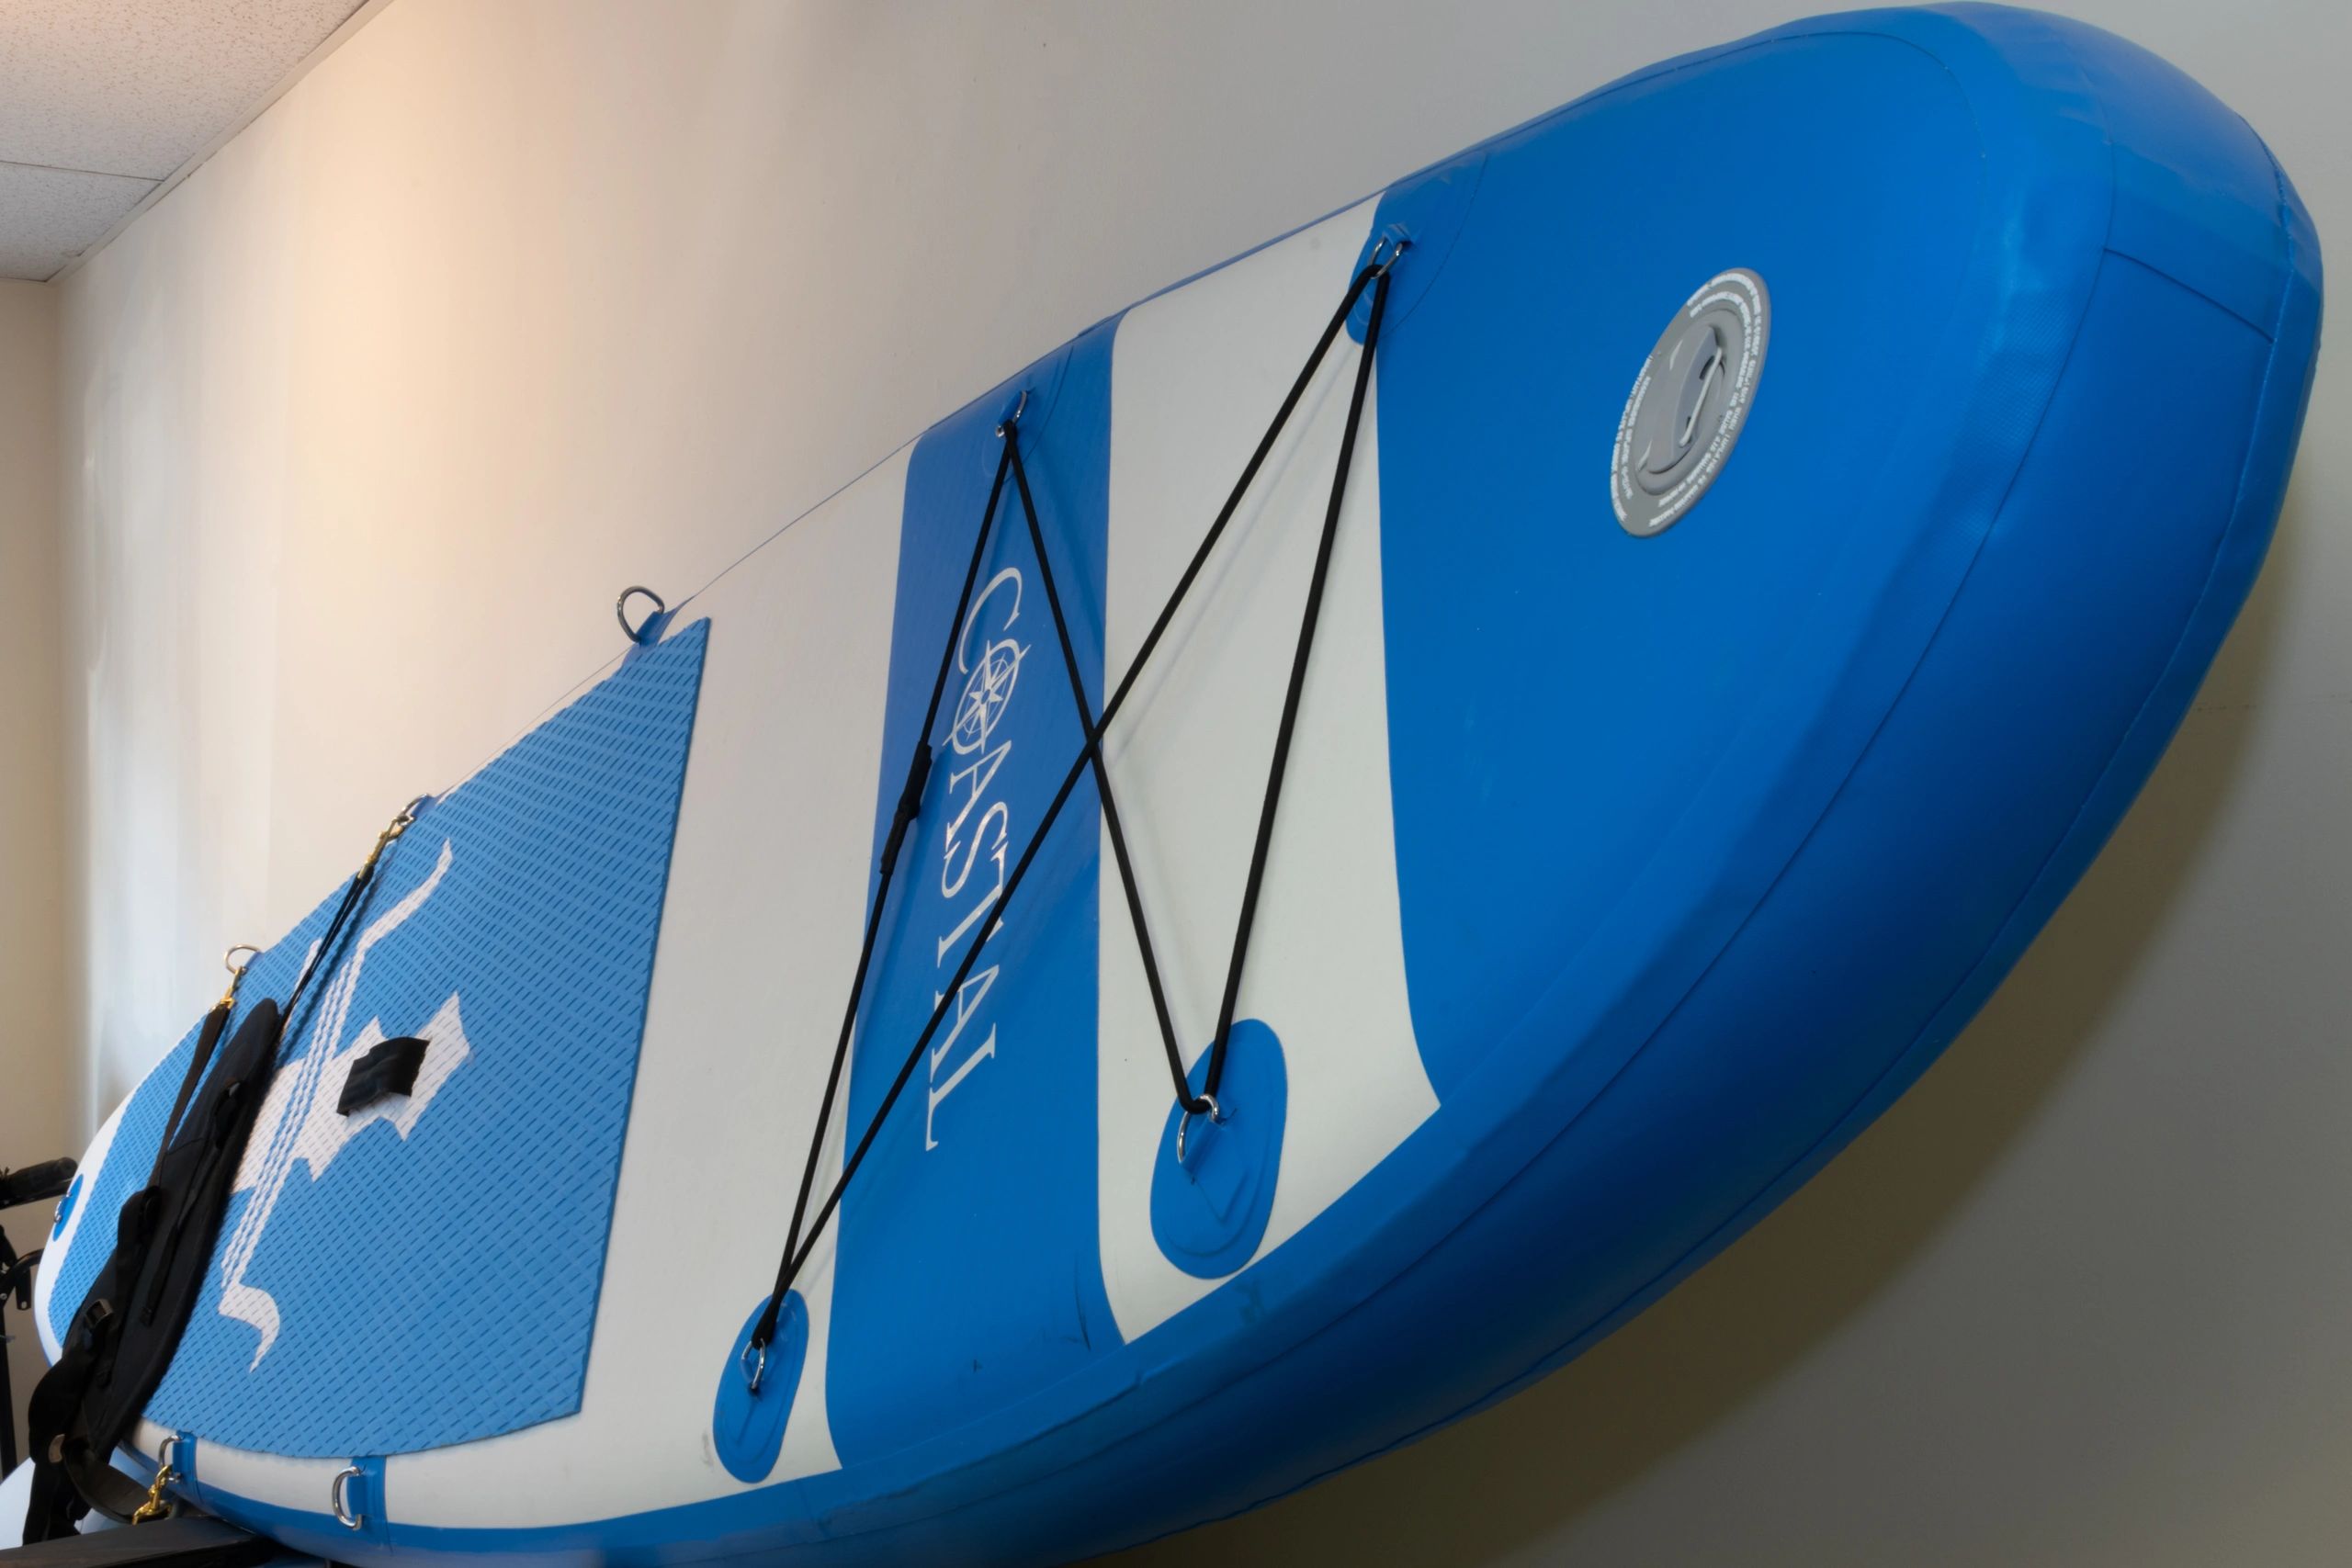 Check out out PaddleBoards!